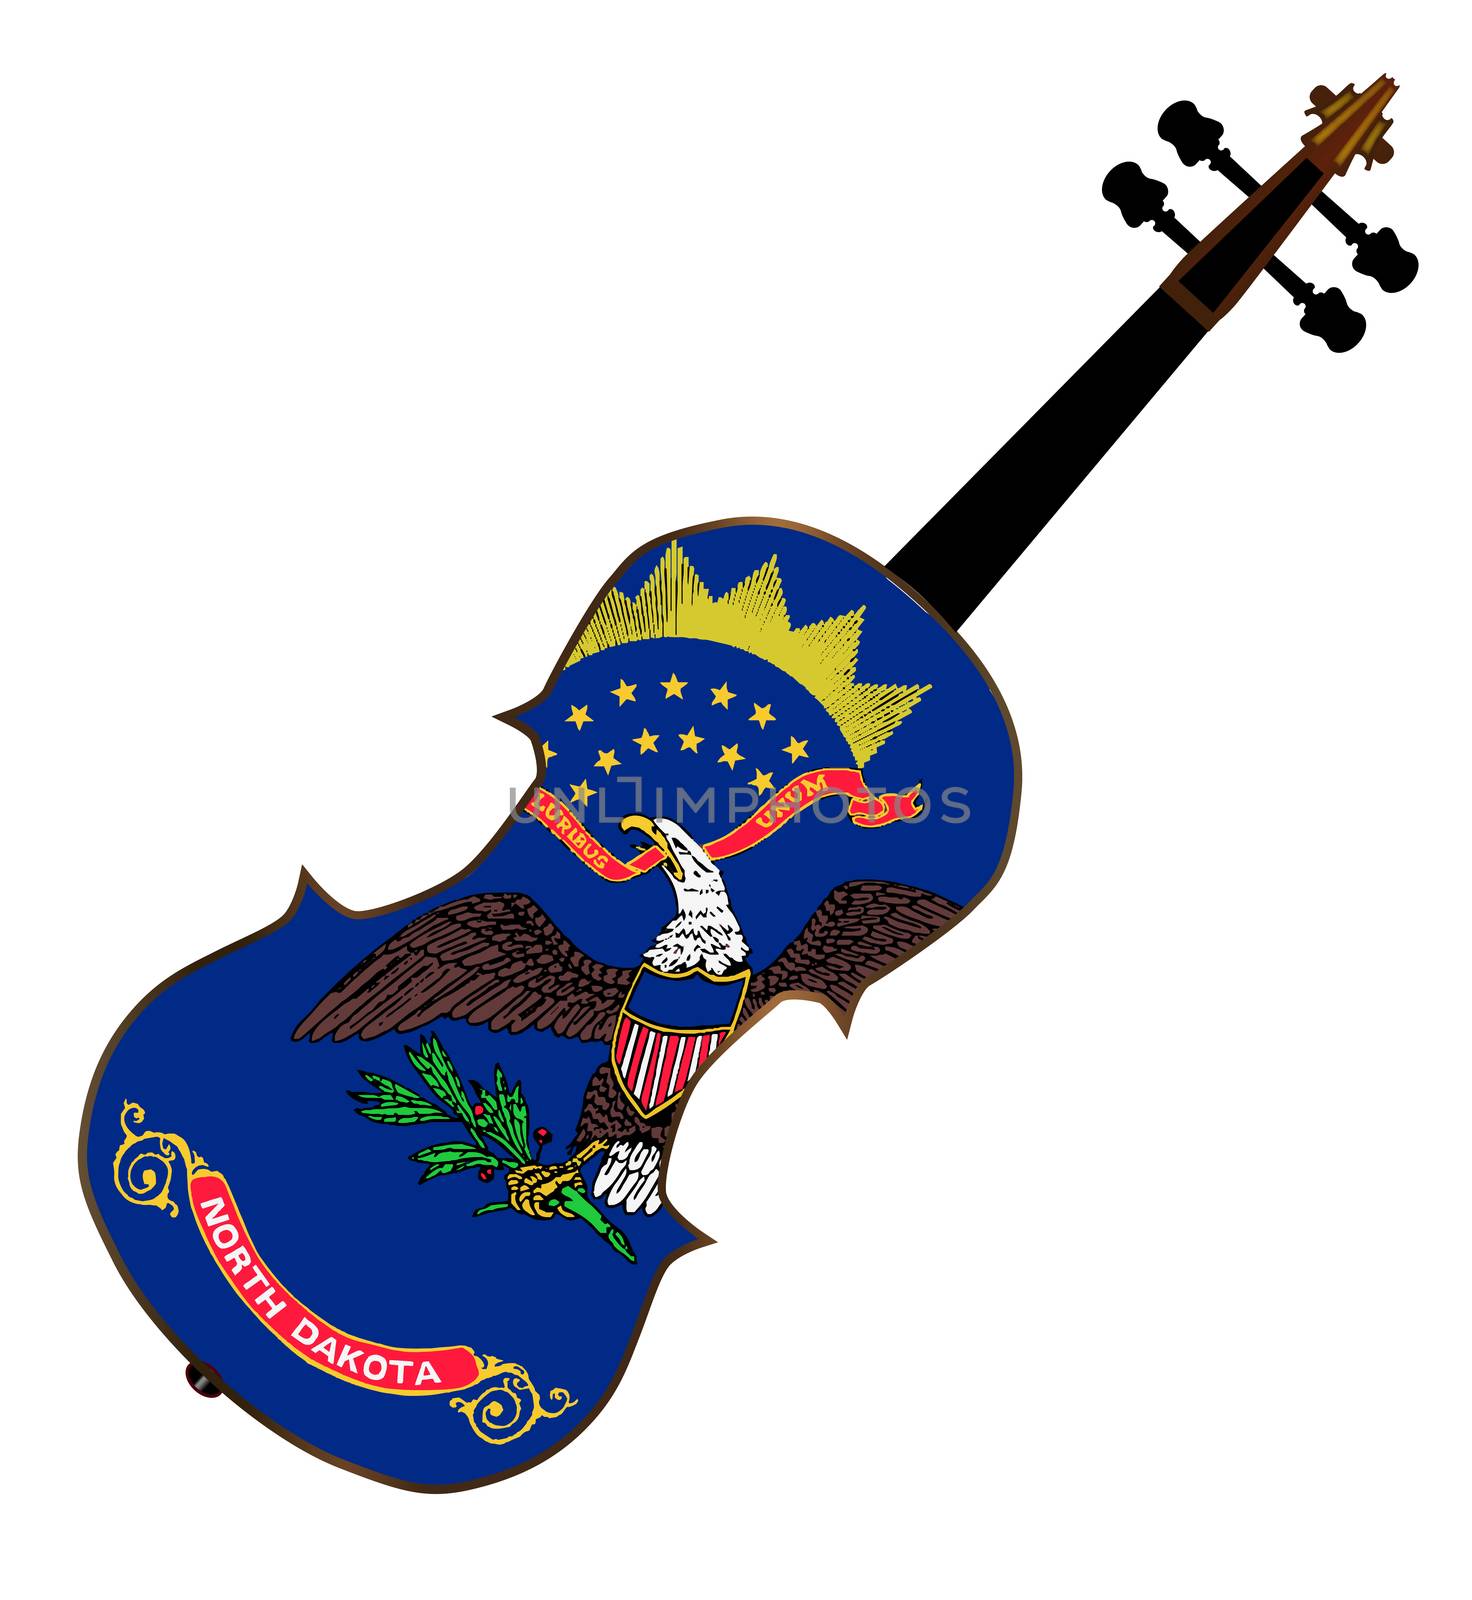 A typical violin with North Dakota state flag isolated over a white background